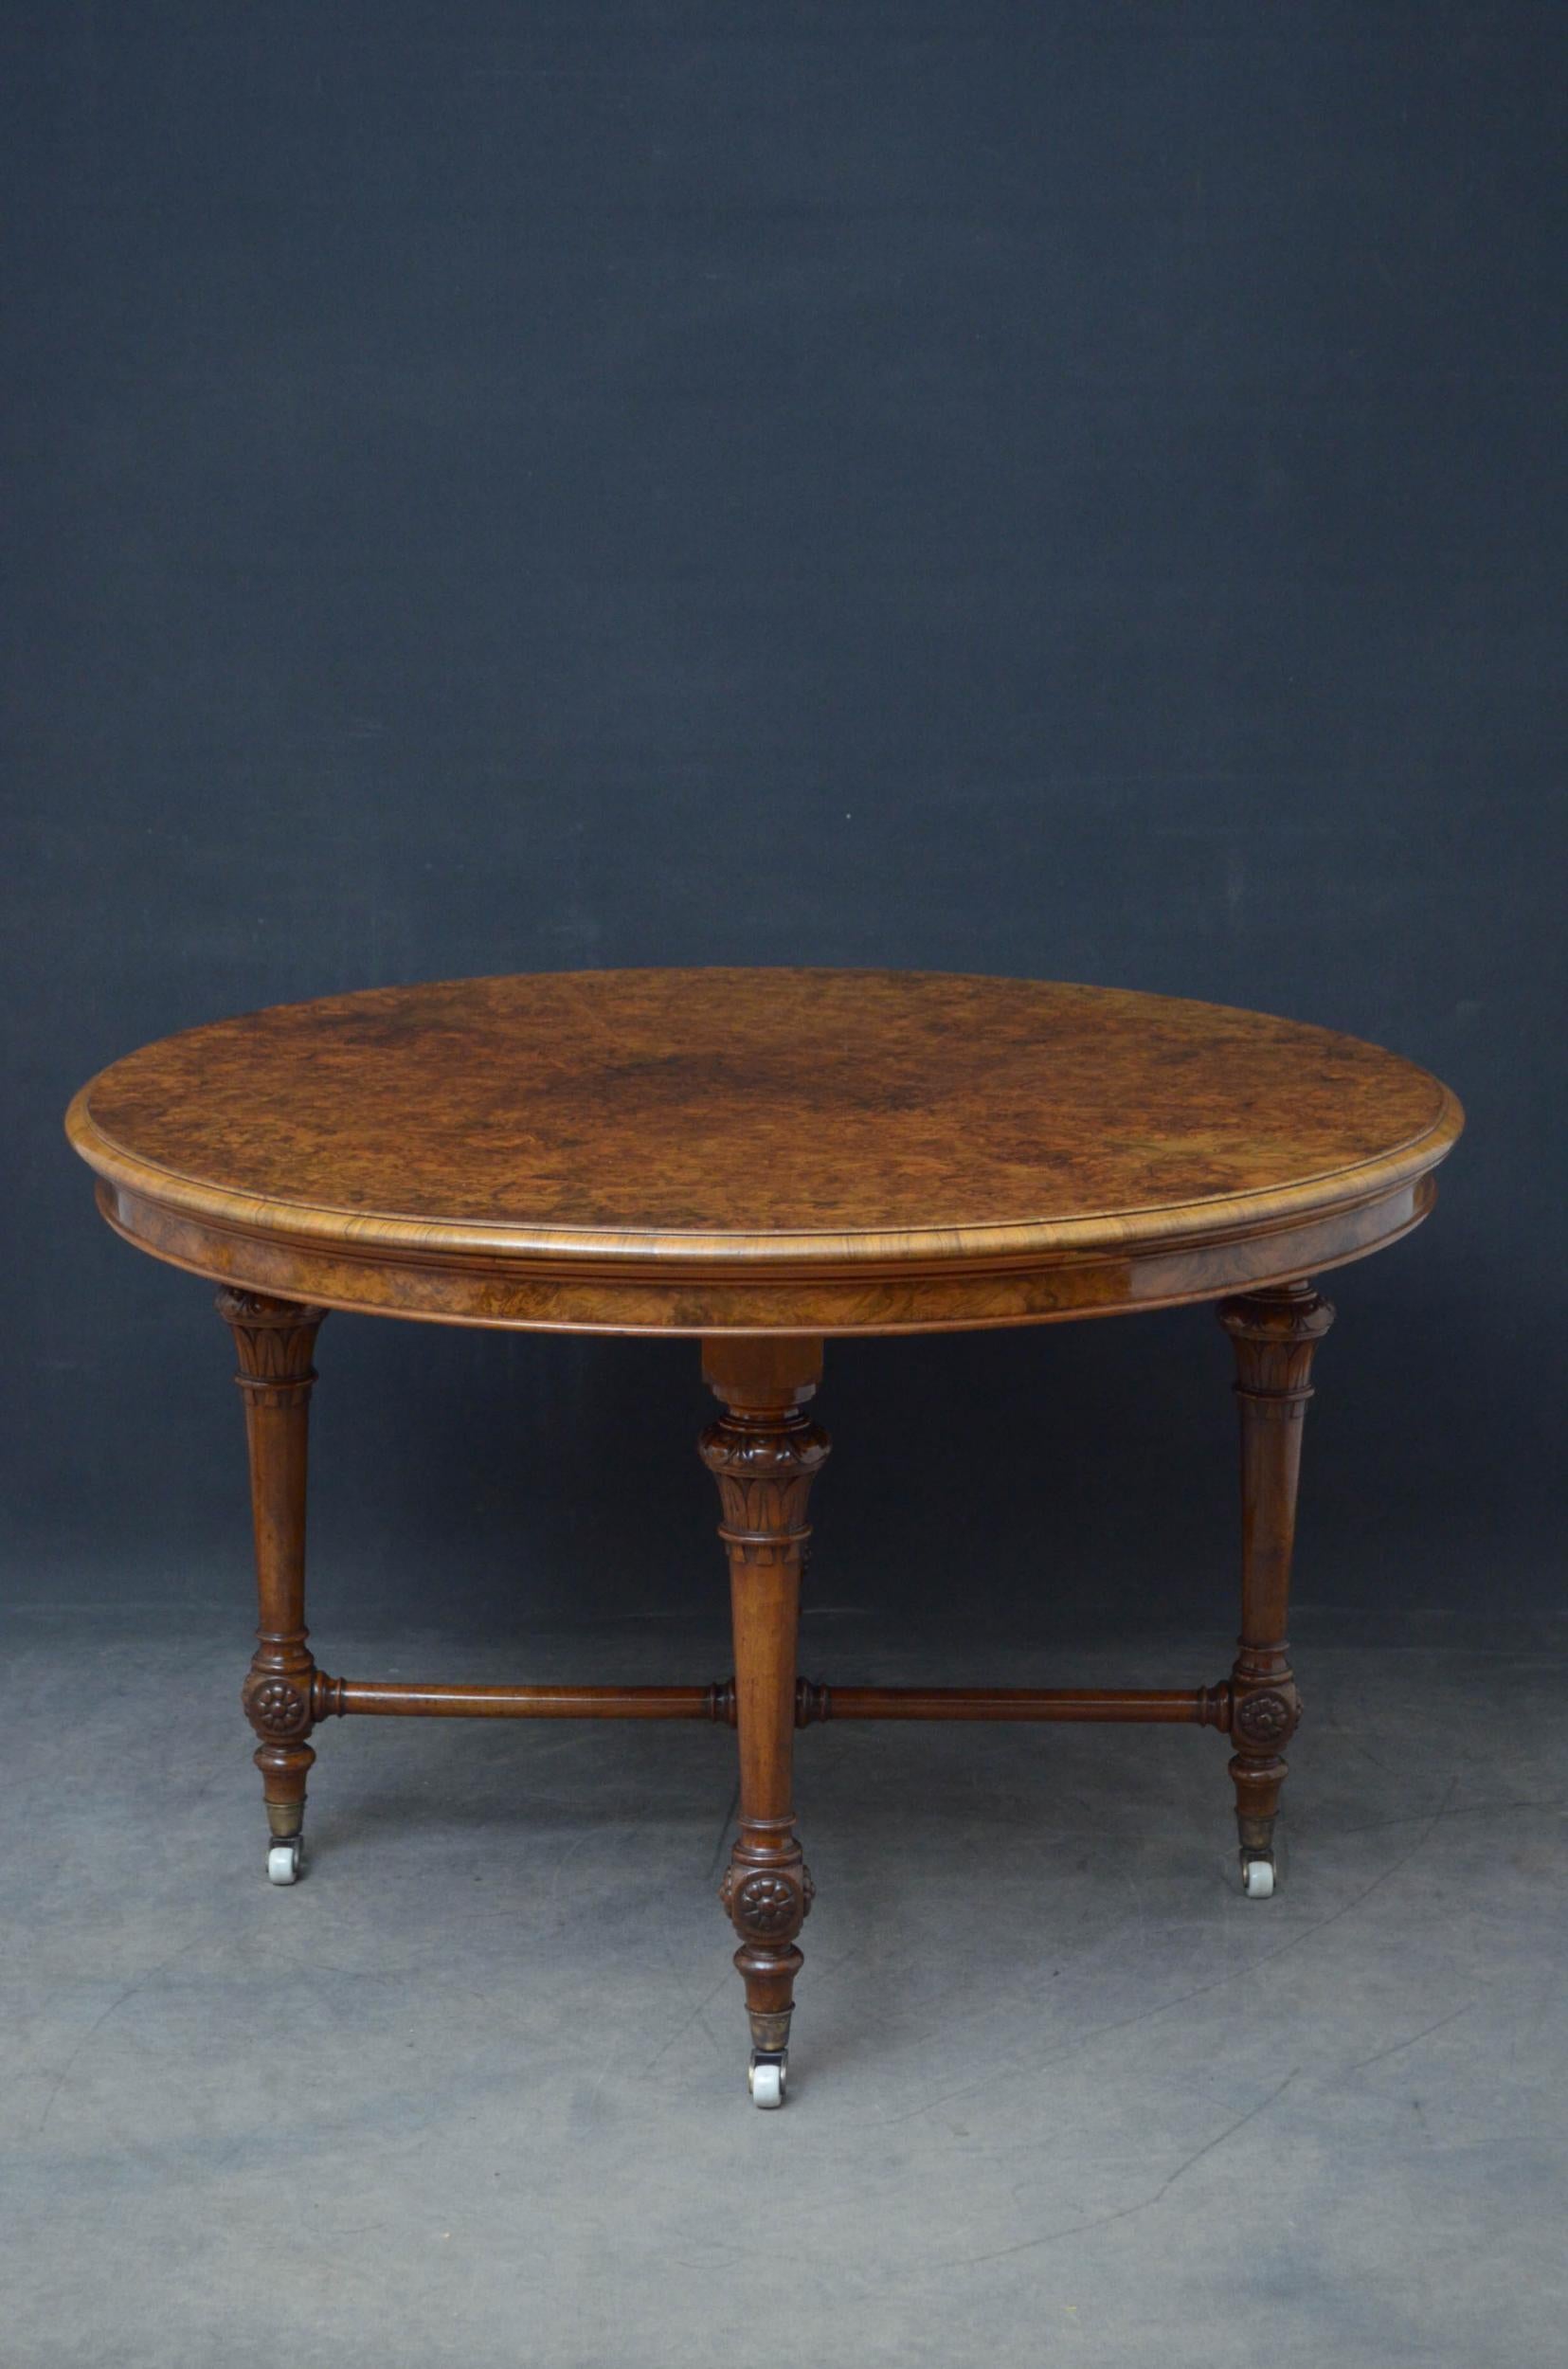 J00 unusual Victorian centre table having a superb burr walnut top with moulded edge above shallow frieze, standing on four turned and tapered finely carved legs terminating in cup castors, all united by turned stretcher with carved finial to